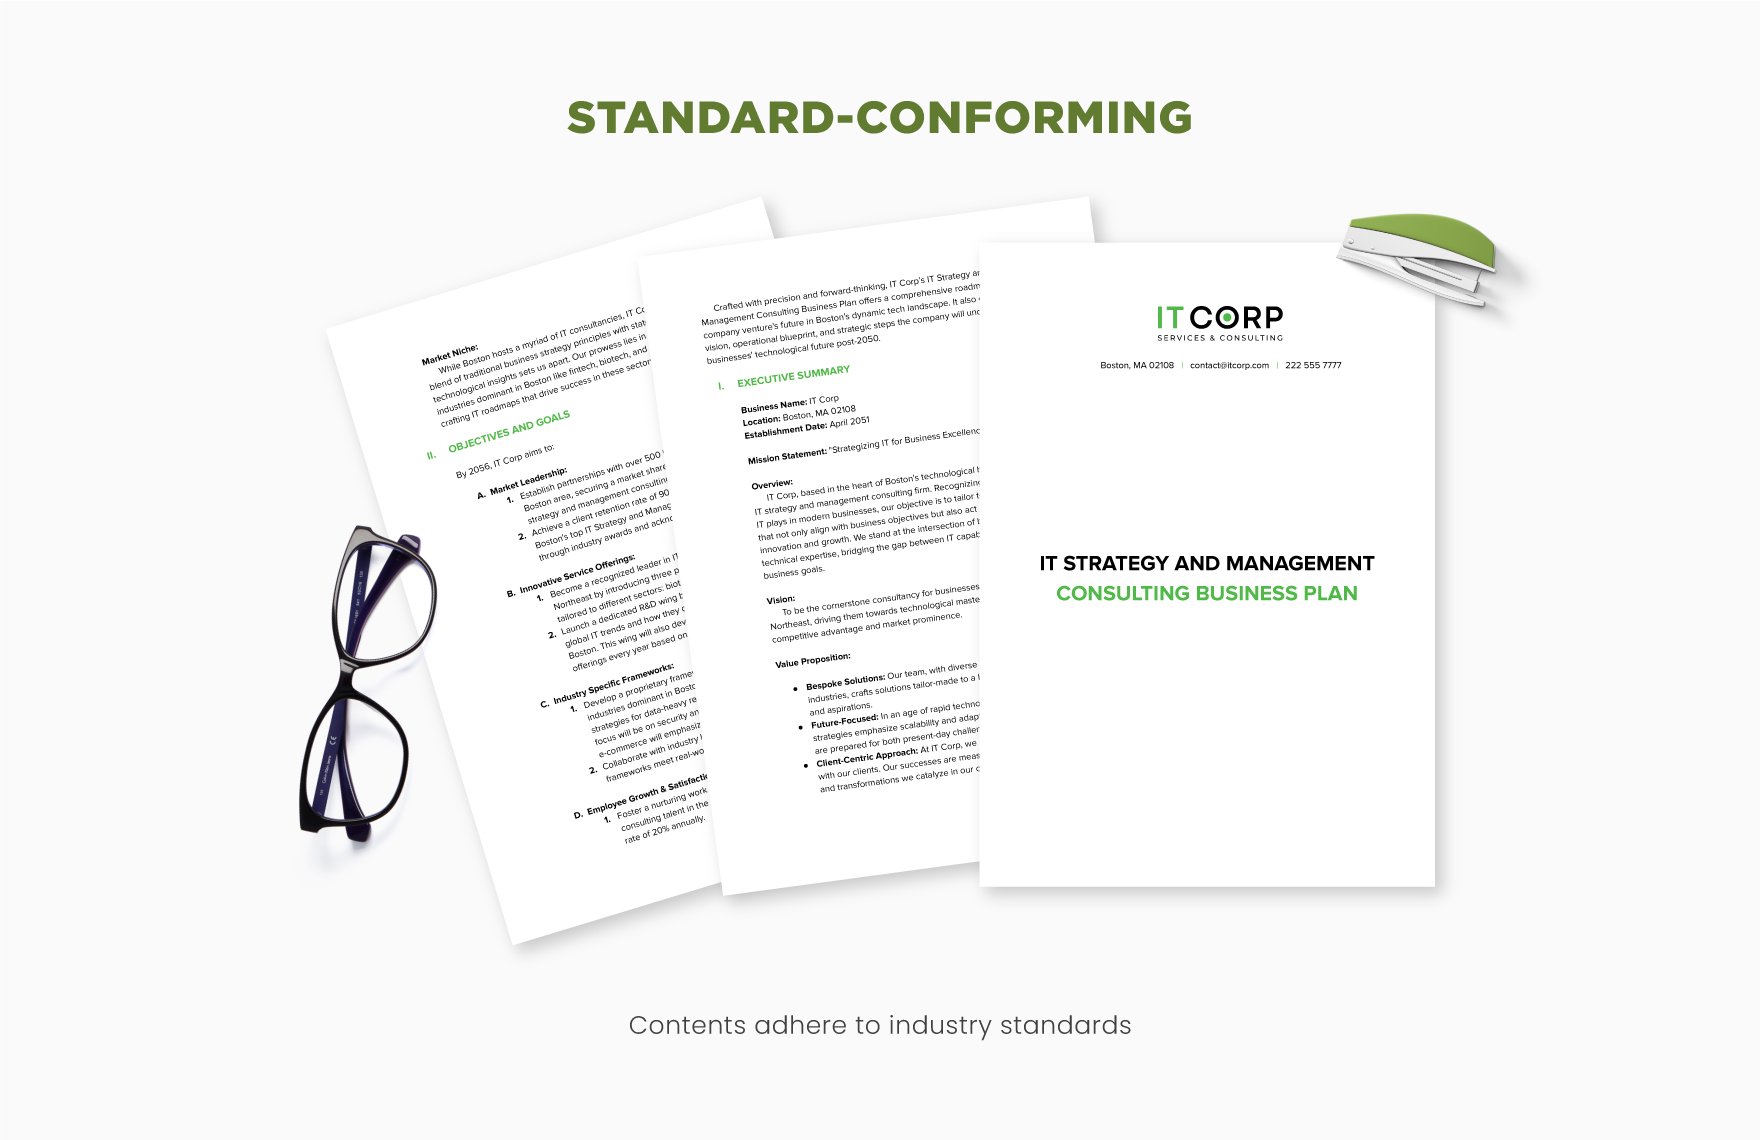 15 IT Services and Consulting Business Plan Template Bundle